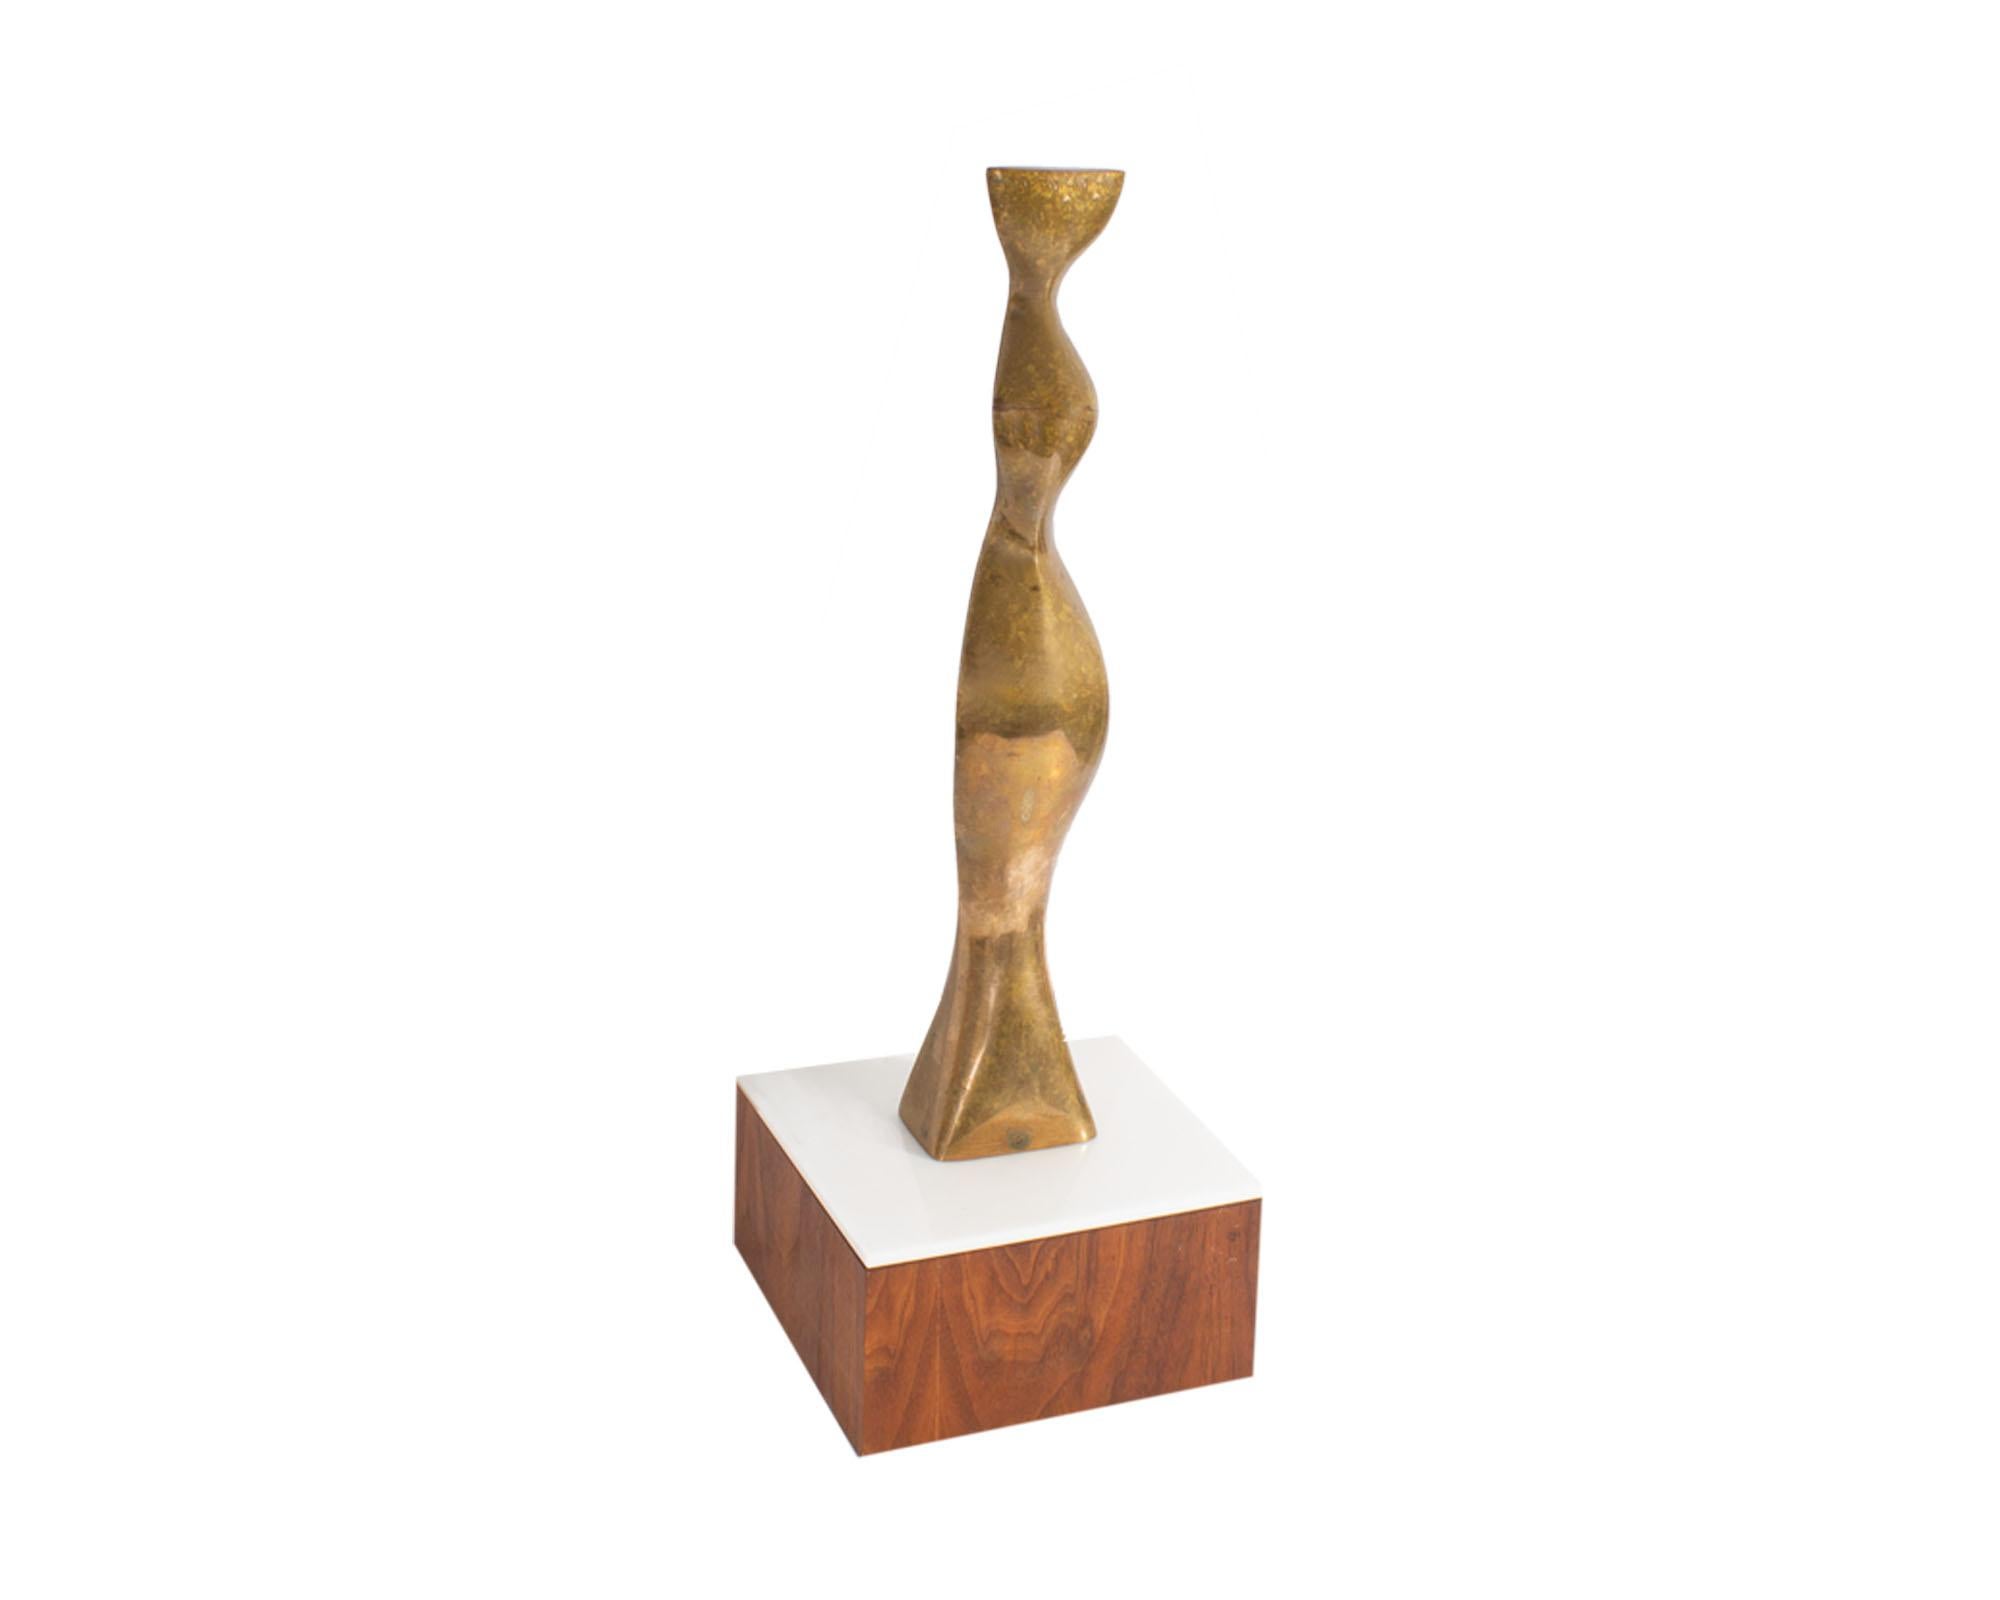 A 1980 limited edition bronze sculpture by American artist Joseph Burlini (born 1937). This sculpture is composed of a metal abstract and curved female figure attached to a white acrylic and wood base. The piece is signed “Joseph A. Burlini” on side